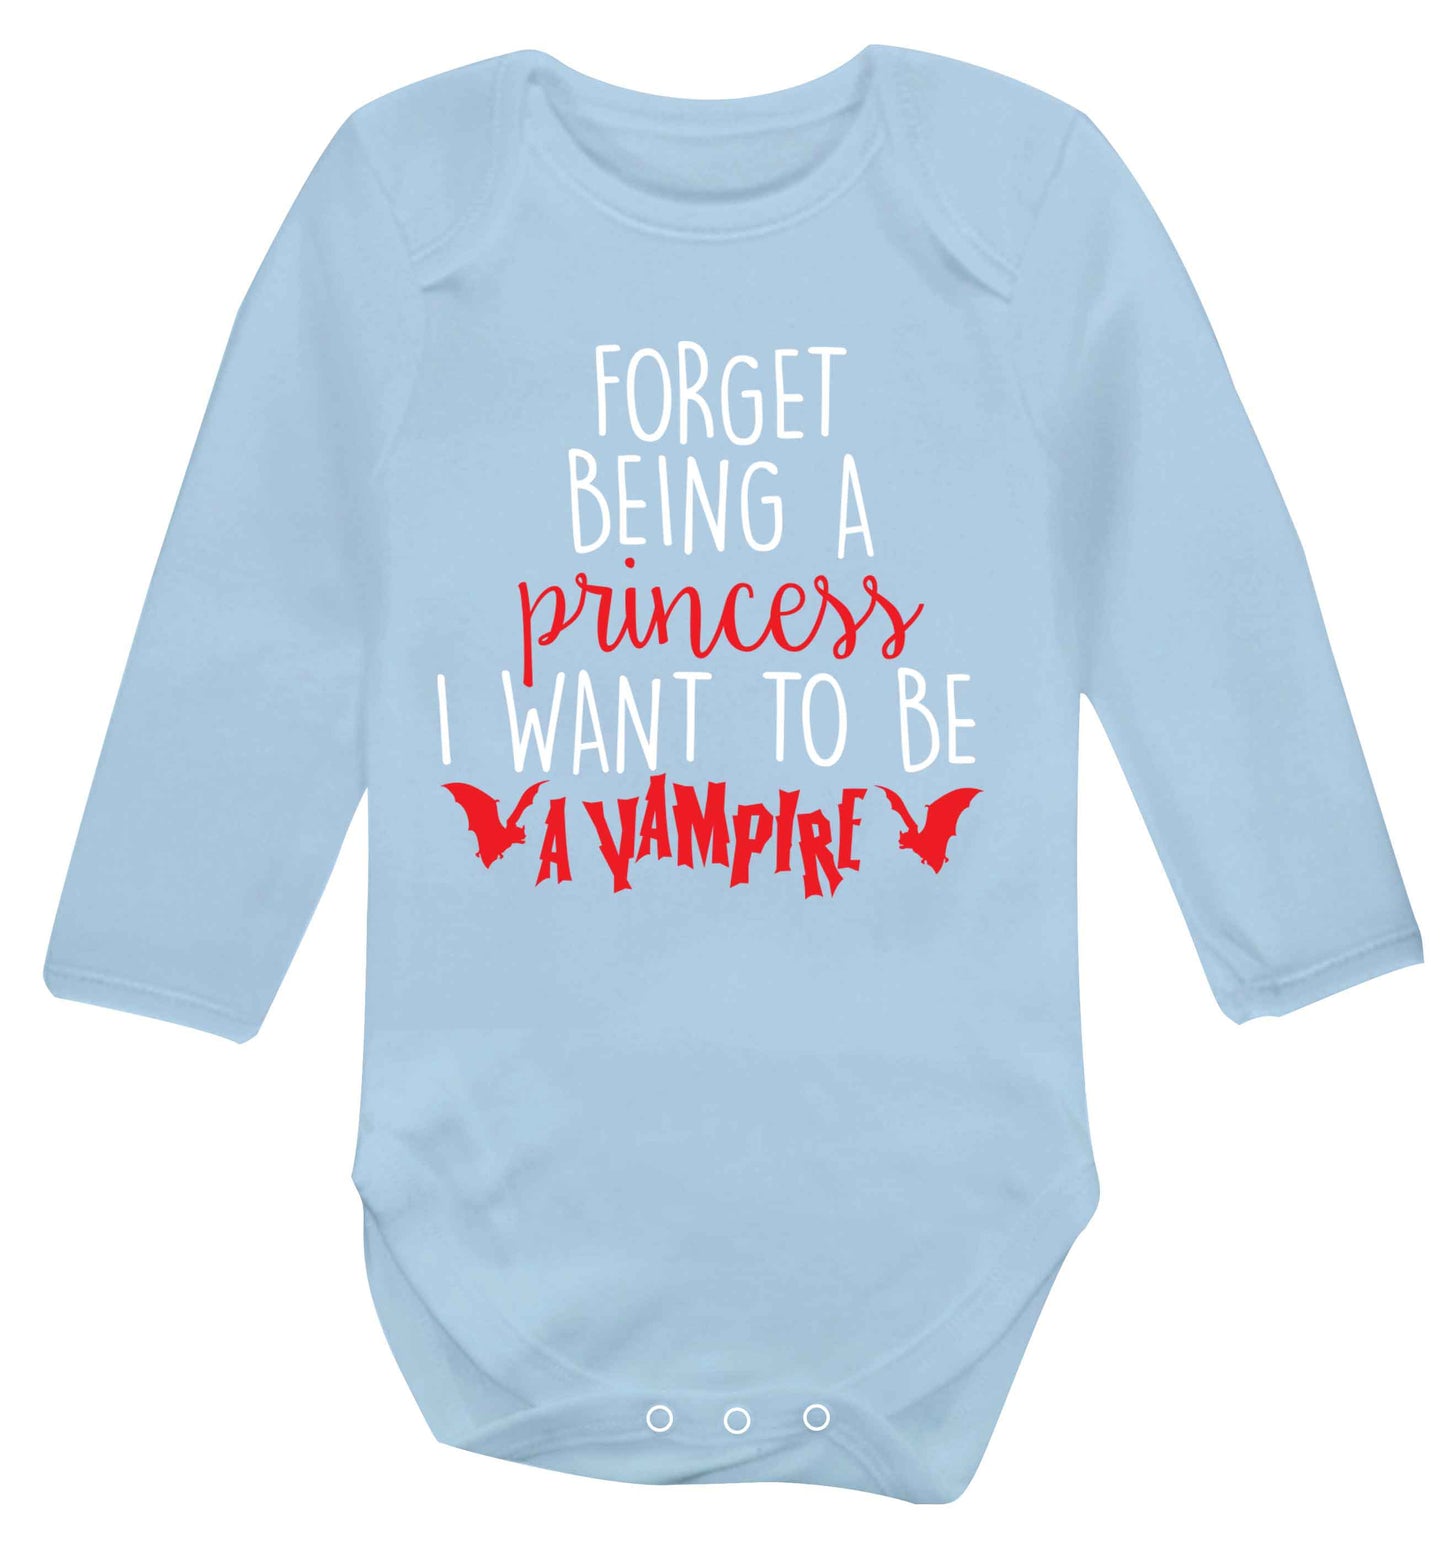 Forget being a princess I want to be a vampire Baby Vest long sleeved pale blue 6-12 months